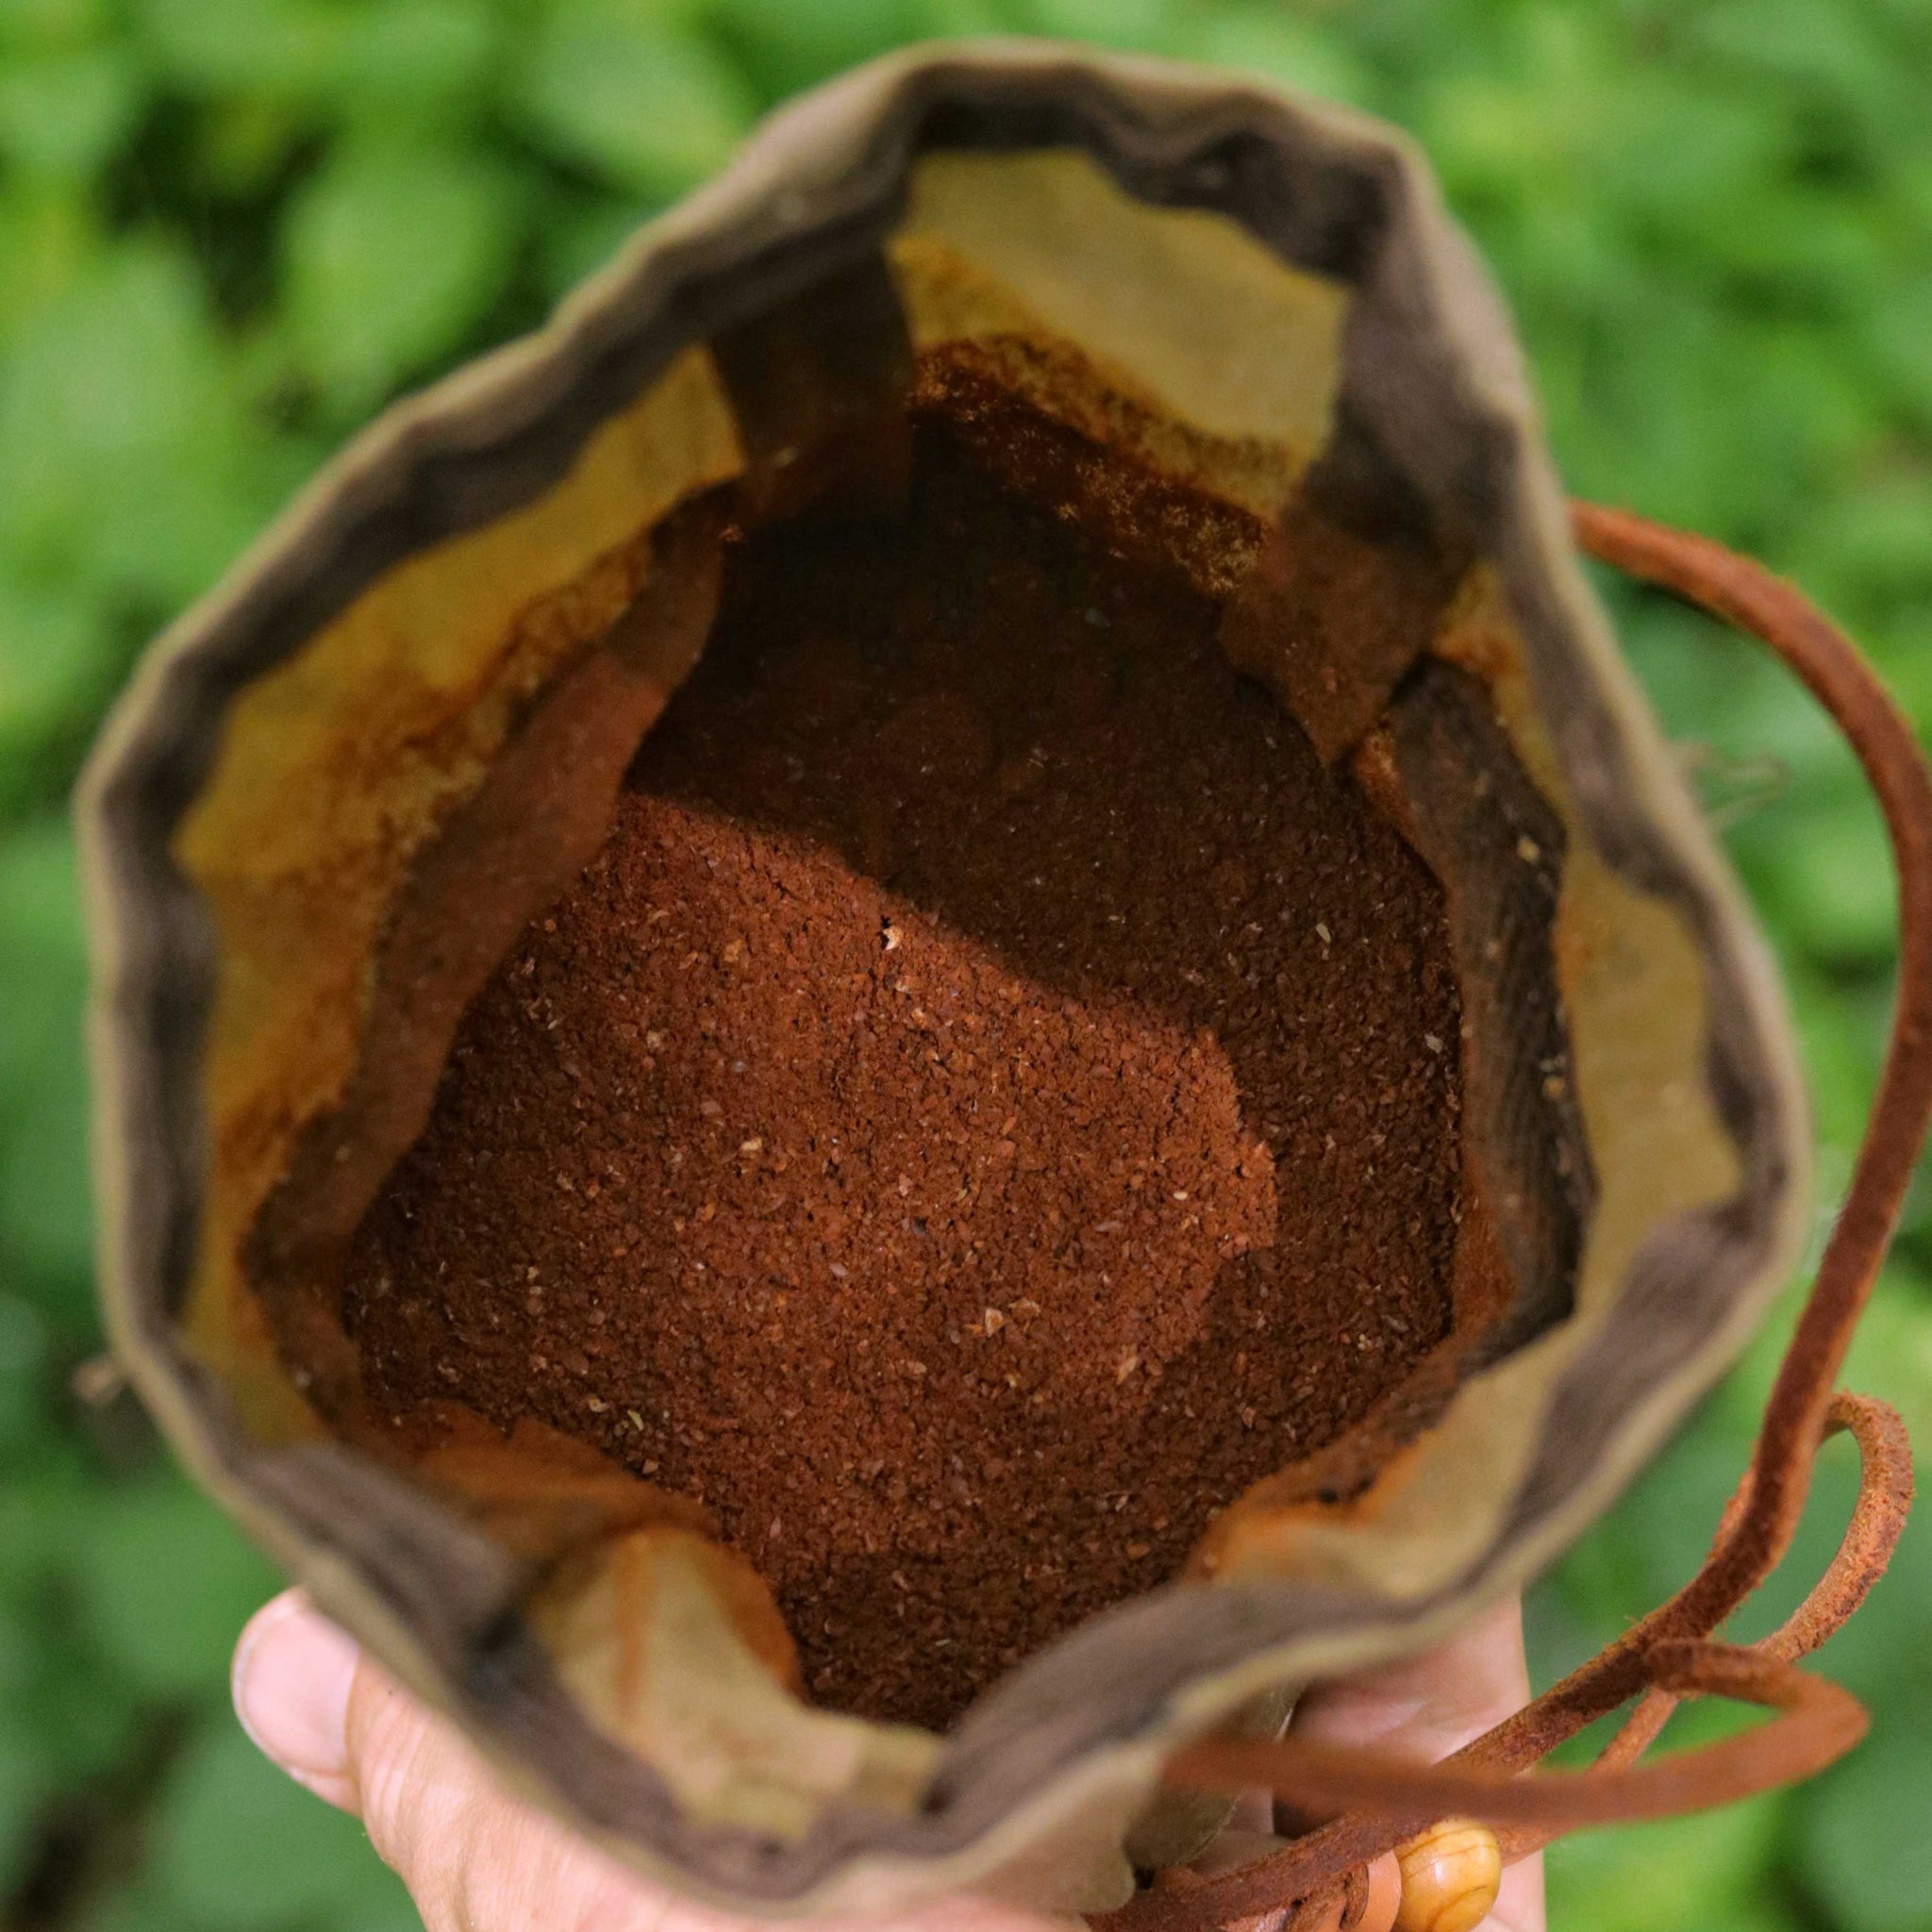 Freshly ground coffee in a wax canvas coffee pouch